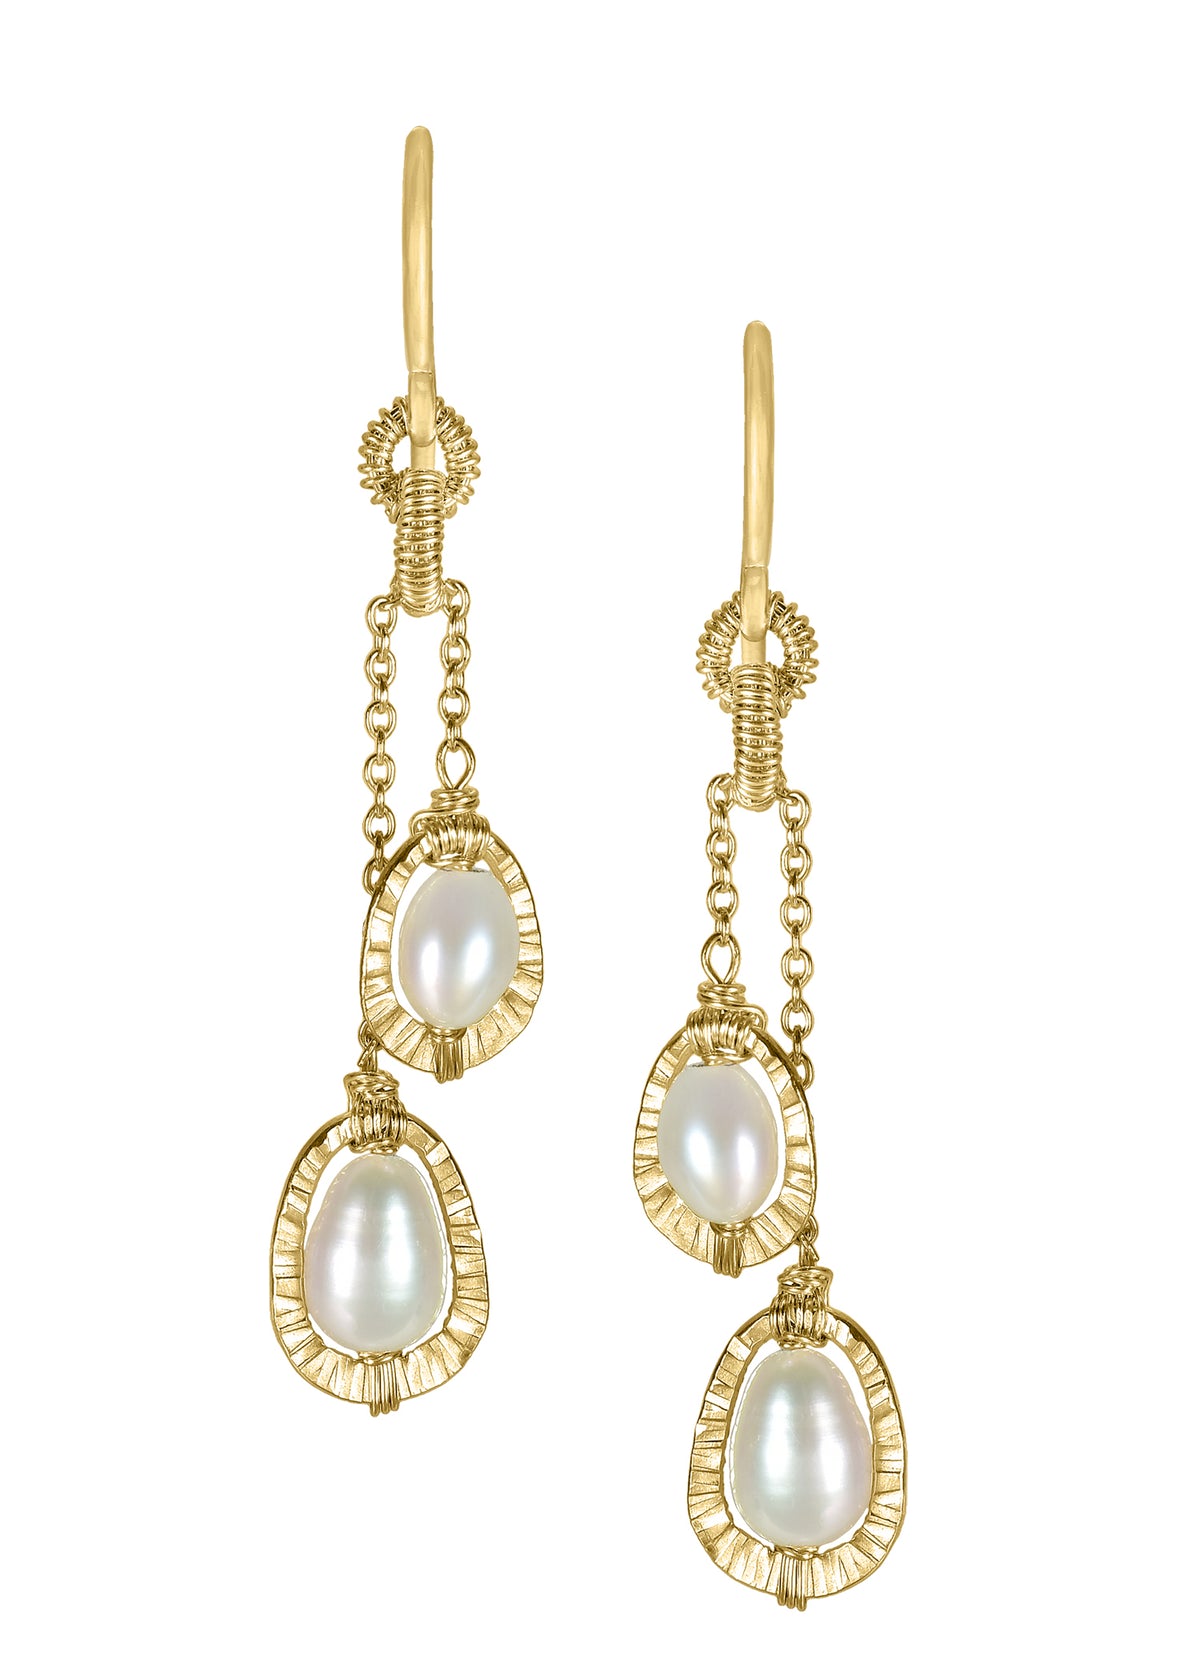 Freshwater pearl 14k gold fill Earrings measure 1-11/16&quot; in length (including the ear wires) Bottom drop measures 1/4&quot; in width Handmade in our Los Angeles studio